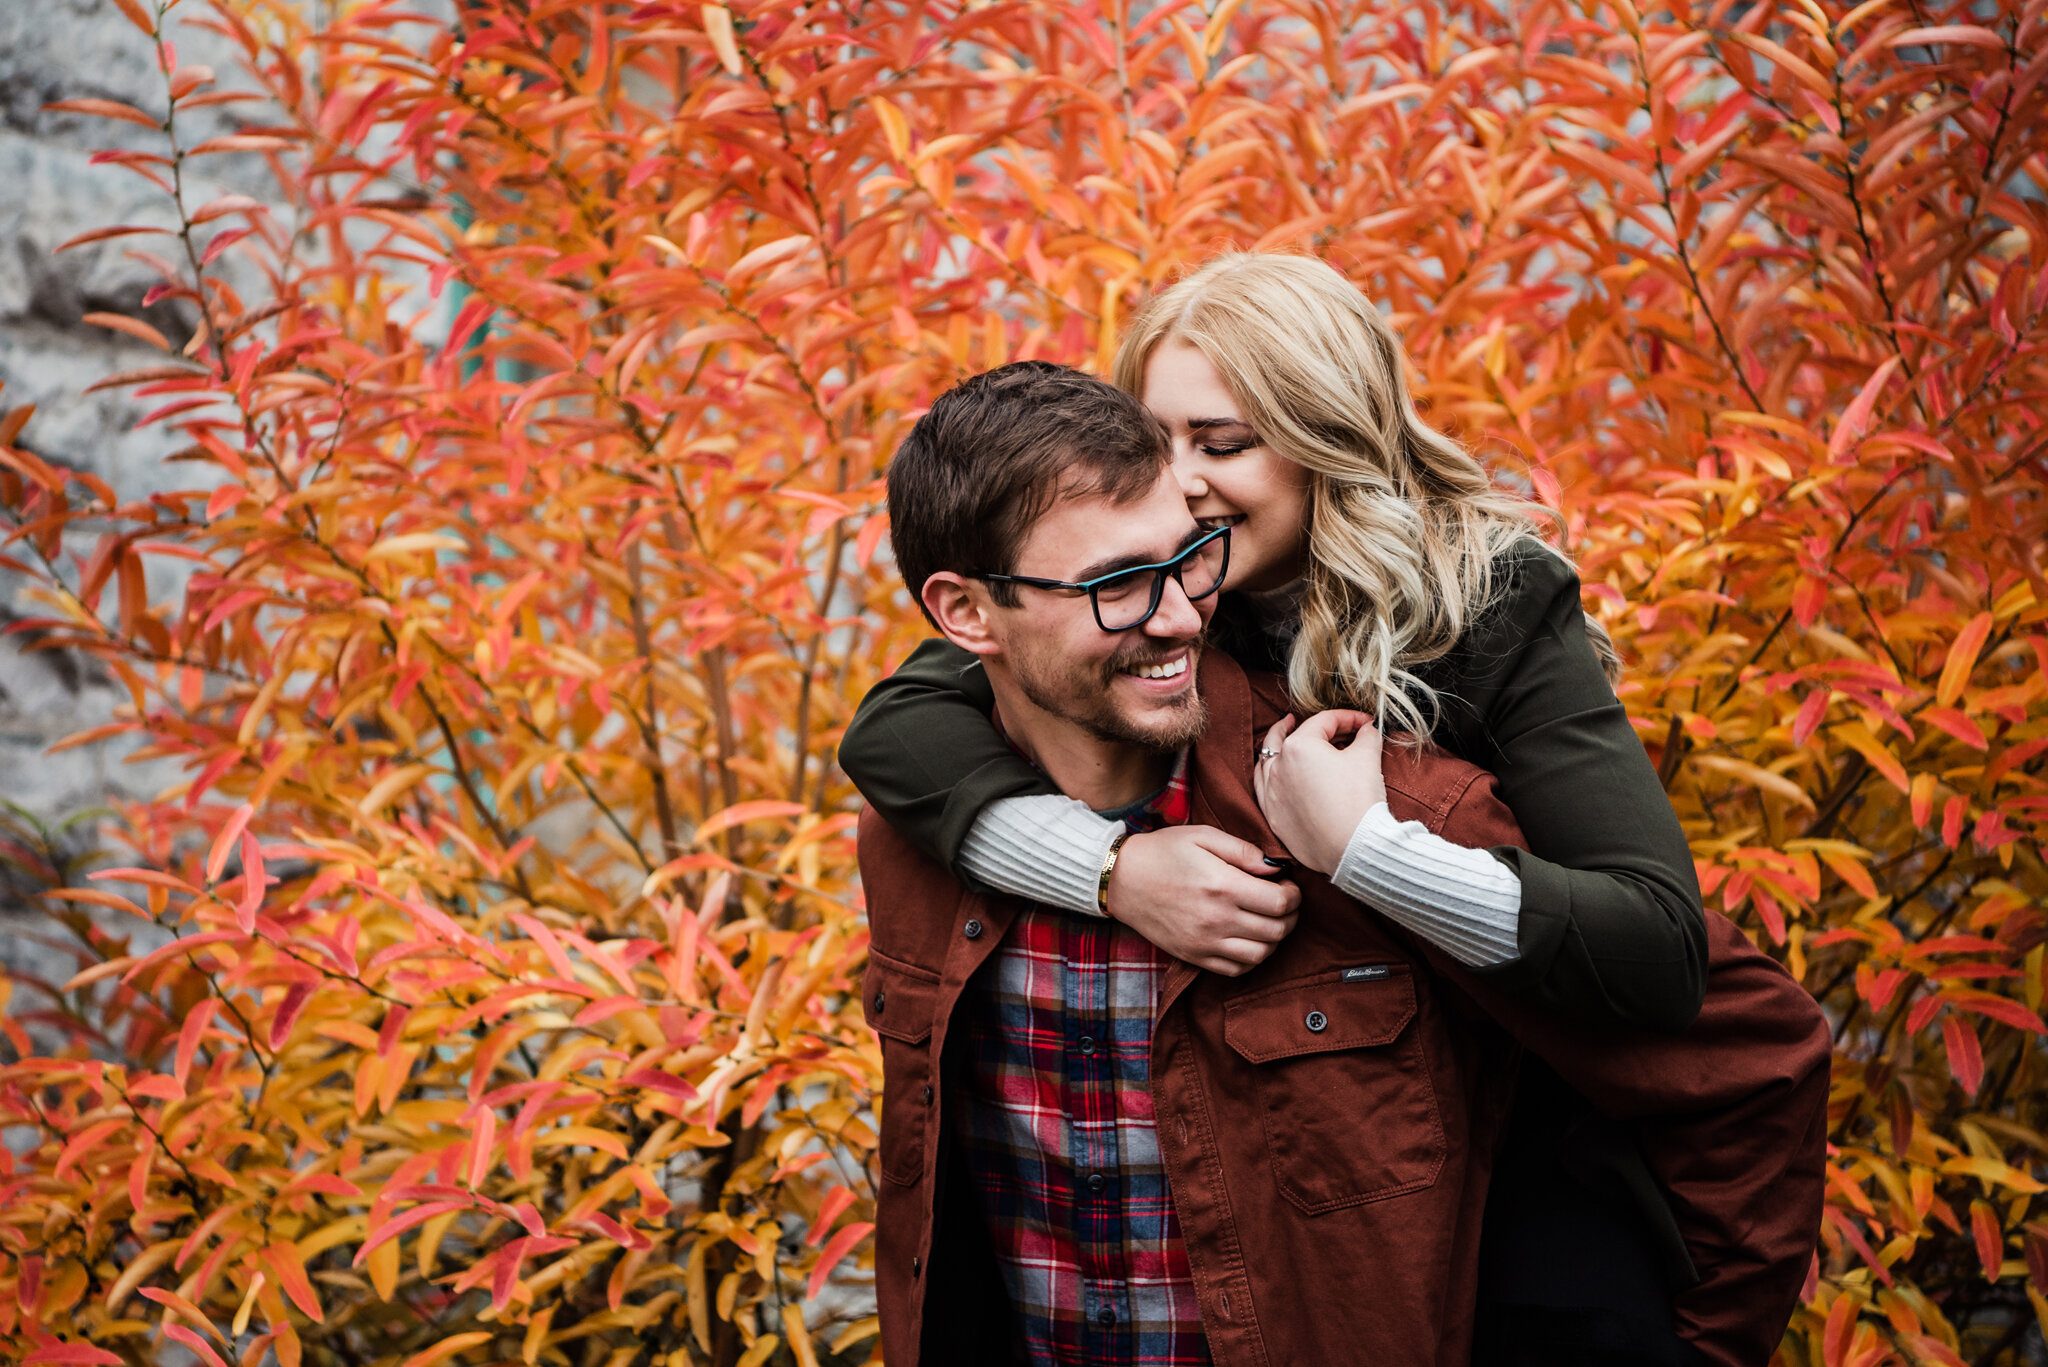 Forest_Lawn_Cemetery_Albright_Knox_Art_Gallery_Buffalo_Engagement_Session_JILL_STUDIO_Rochester_NY_Photographer_1159.jpg